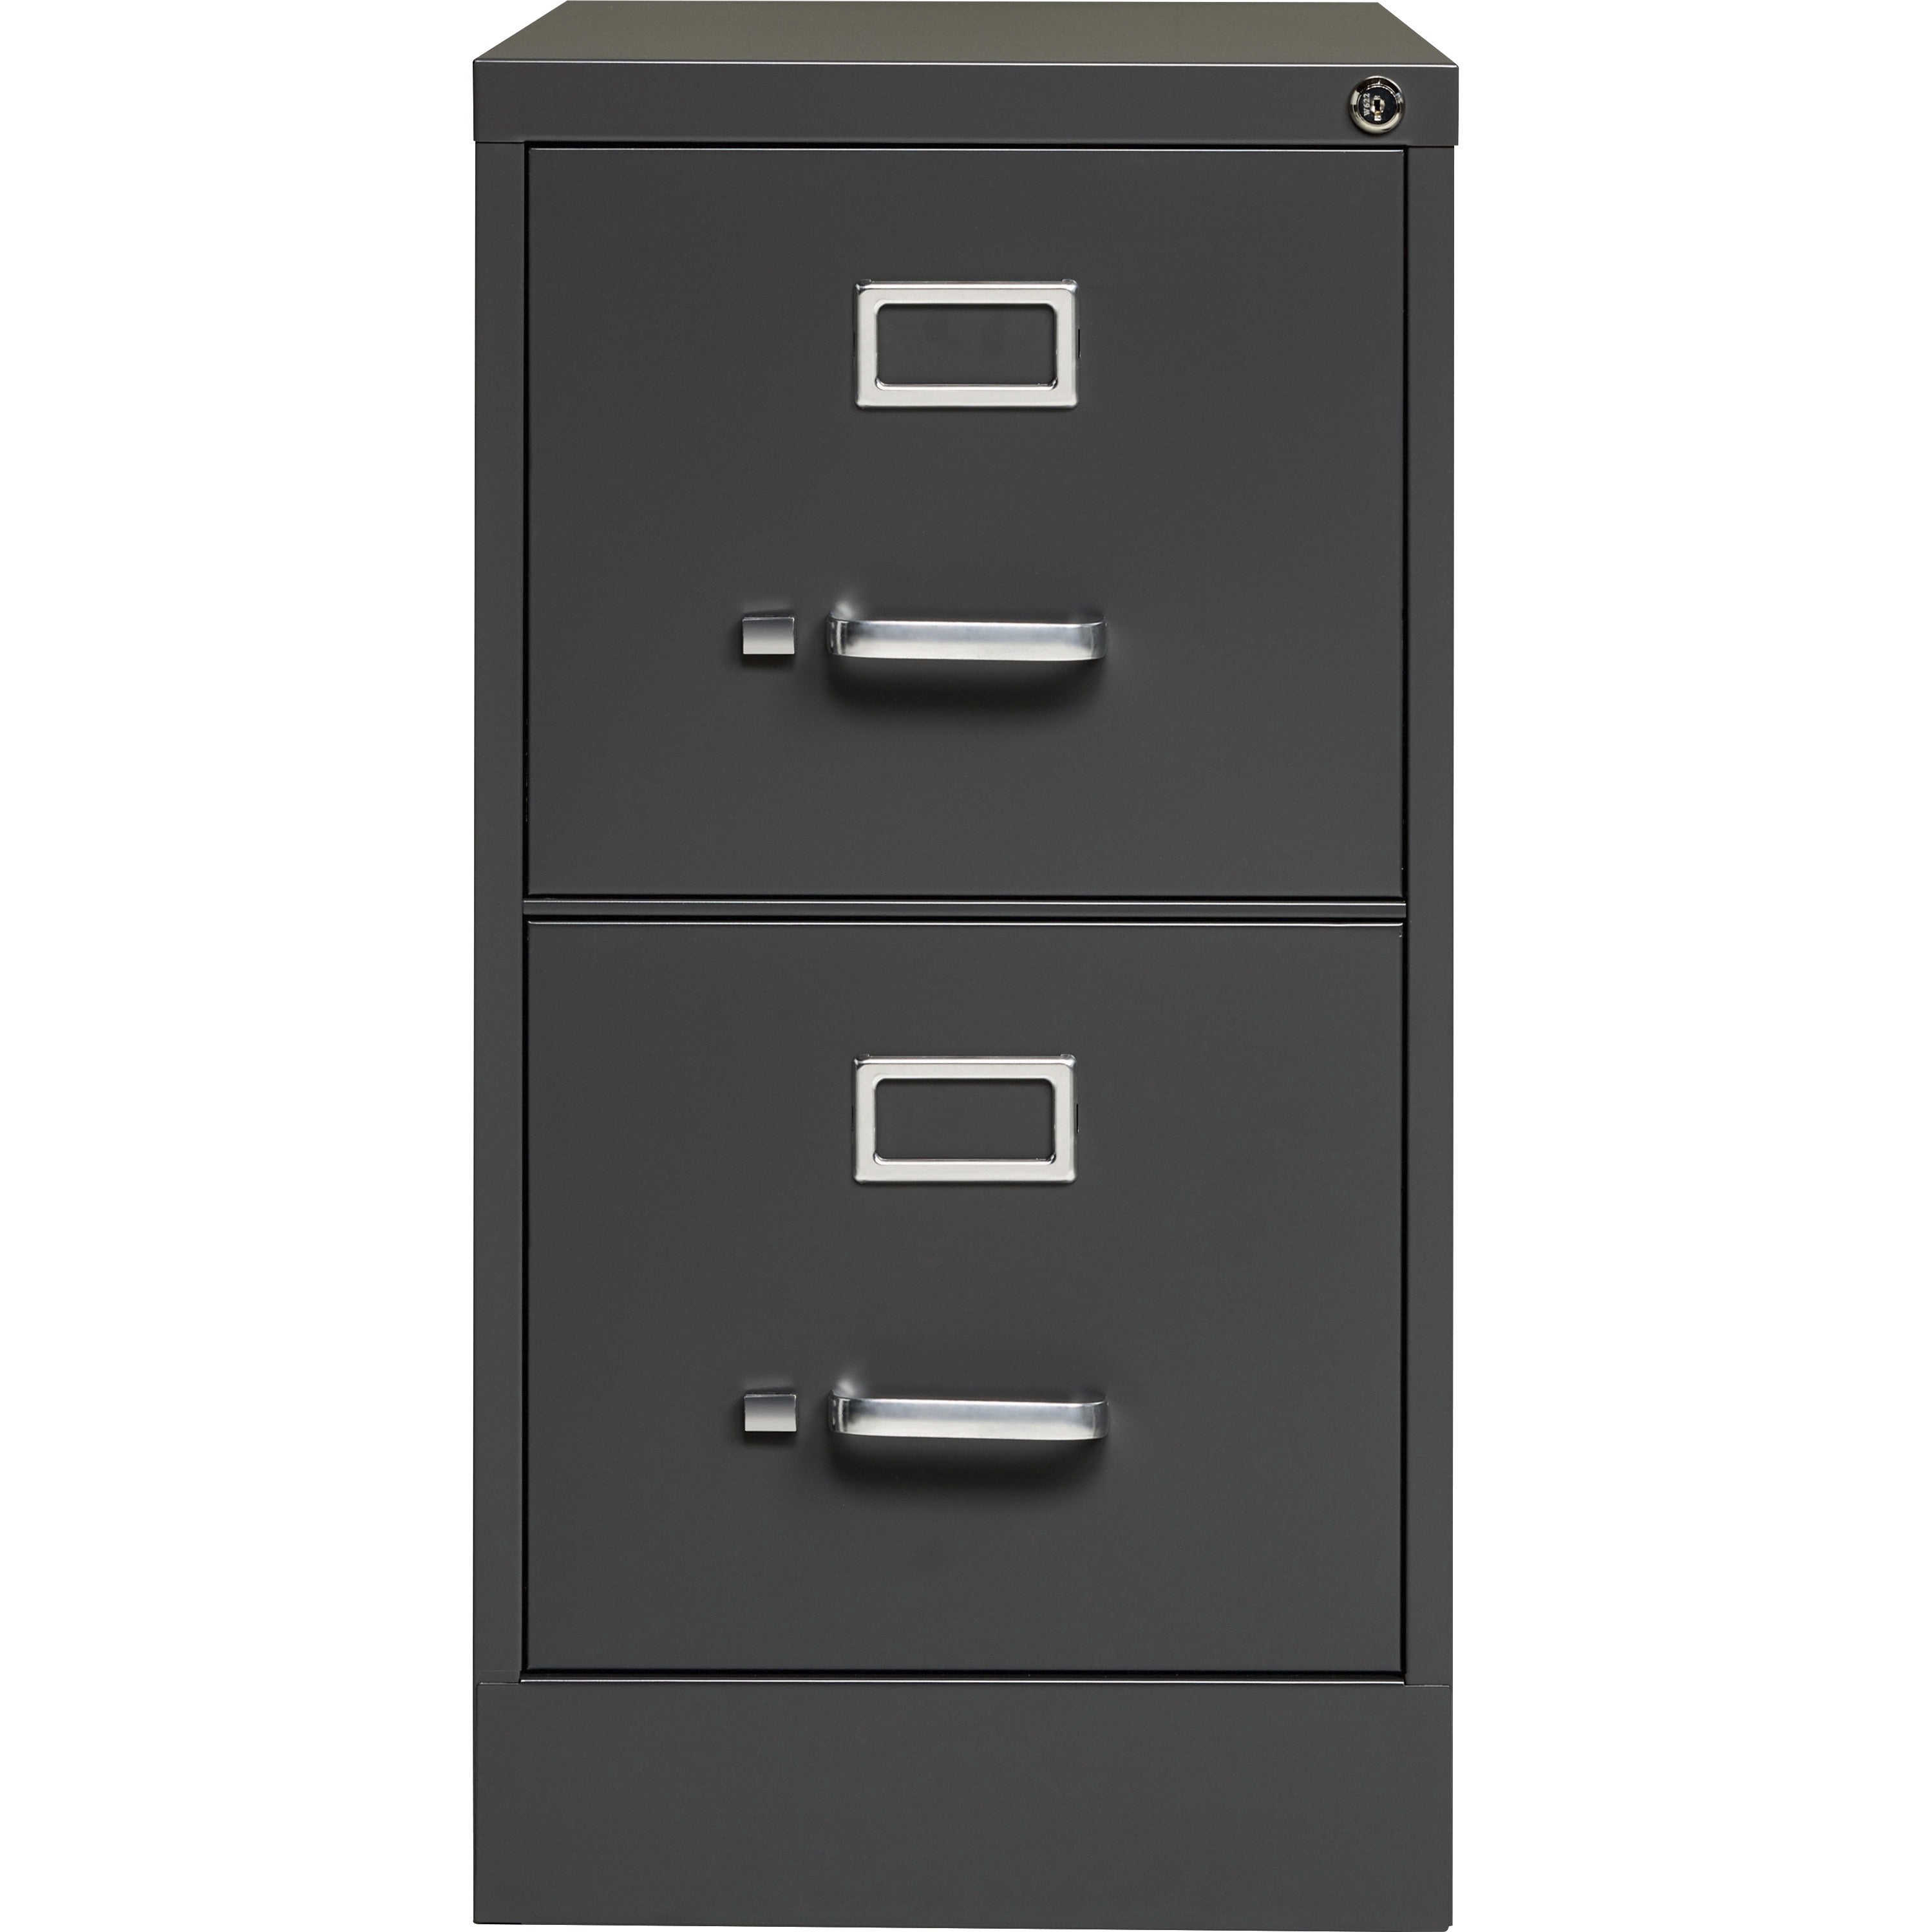 Lorell Fortress Series 26-1/2" Commercial-Grade Vertical File Cabinet - 15" x 26.5" x 28.4" - 2 x Drawer(s) for File - Letter - Vertical - Drawer Extension, Security Lock, Label Holder, Pull Handle - Charcoal - Steel - Recycled - 